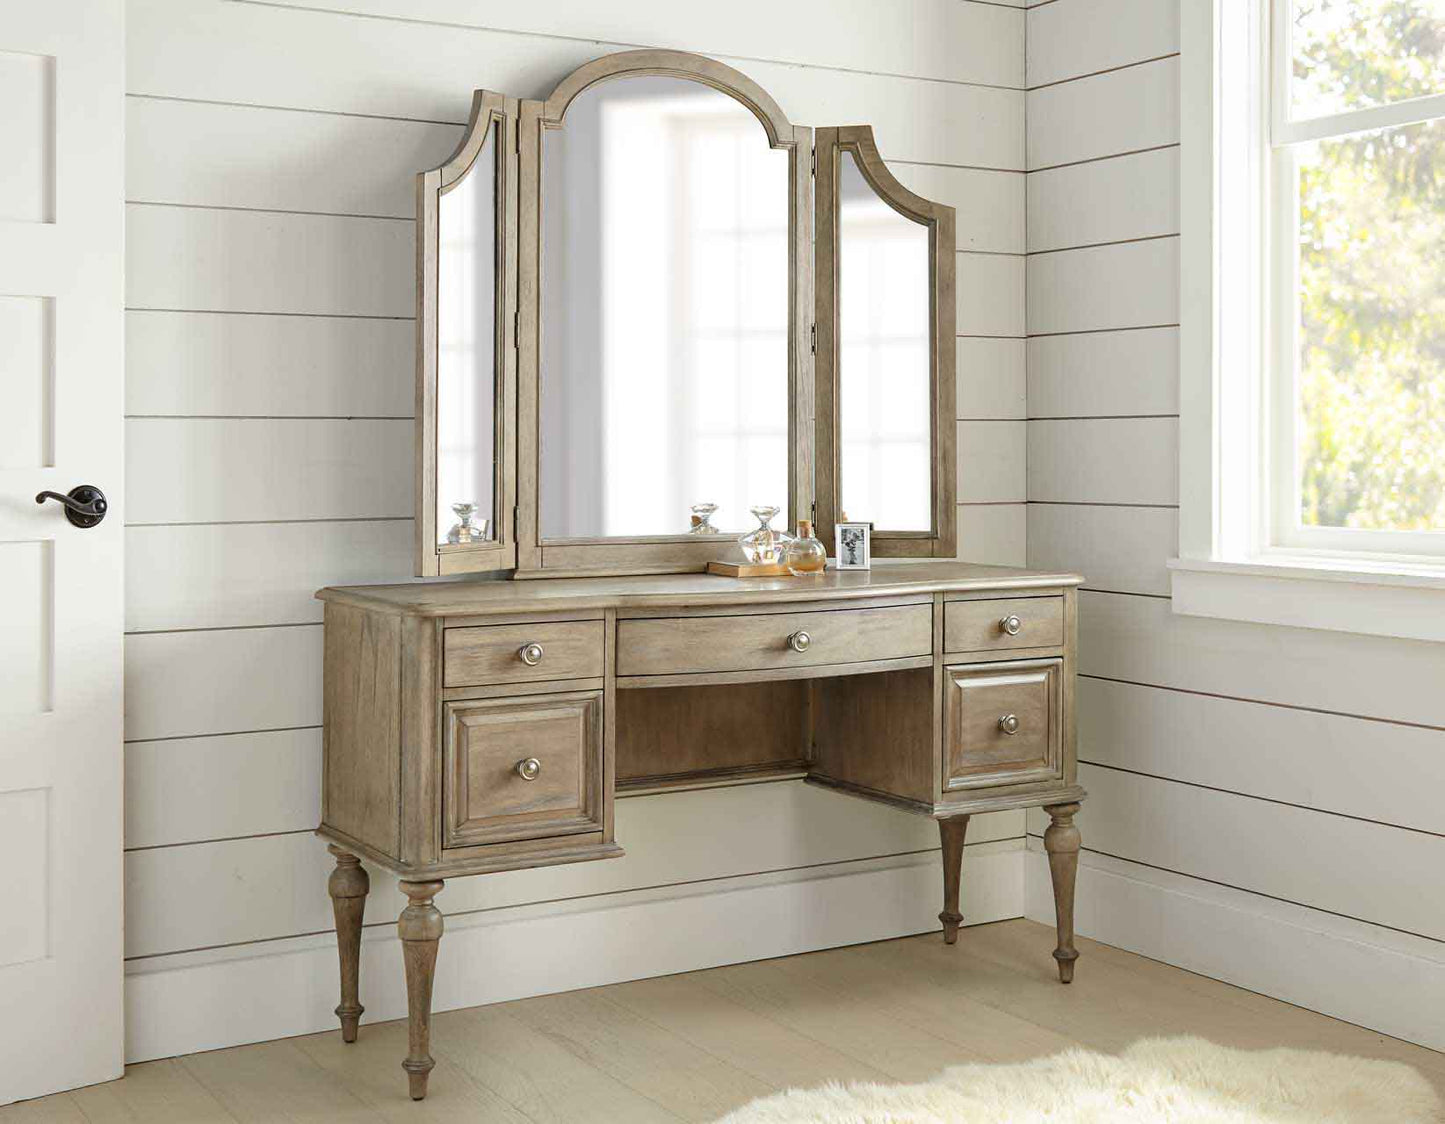 Highland Park Waxed Driftwood Vanity Mirror by Steve Silver